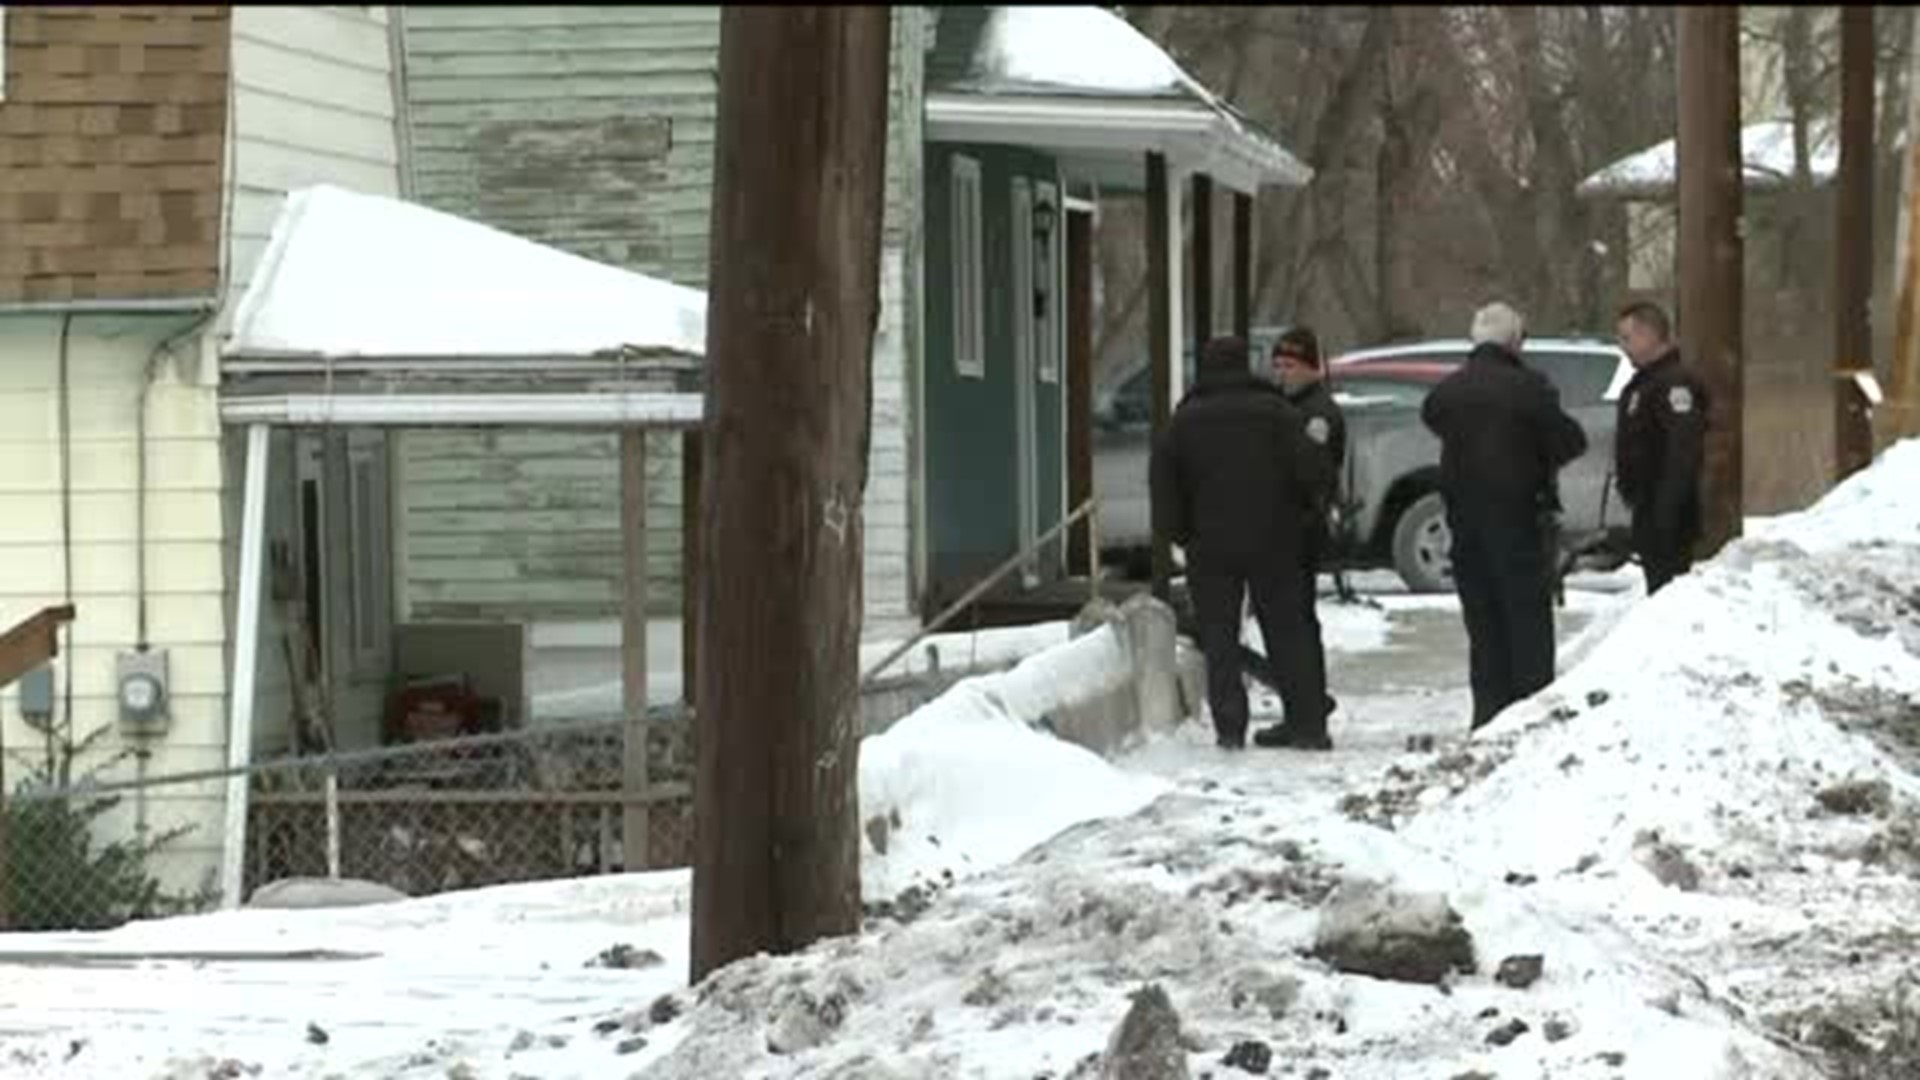 Update: Police Say Landlord Shot Tenant in Buttocks Over Cigarettes